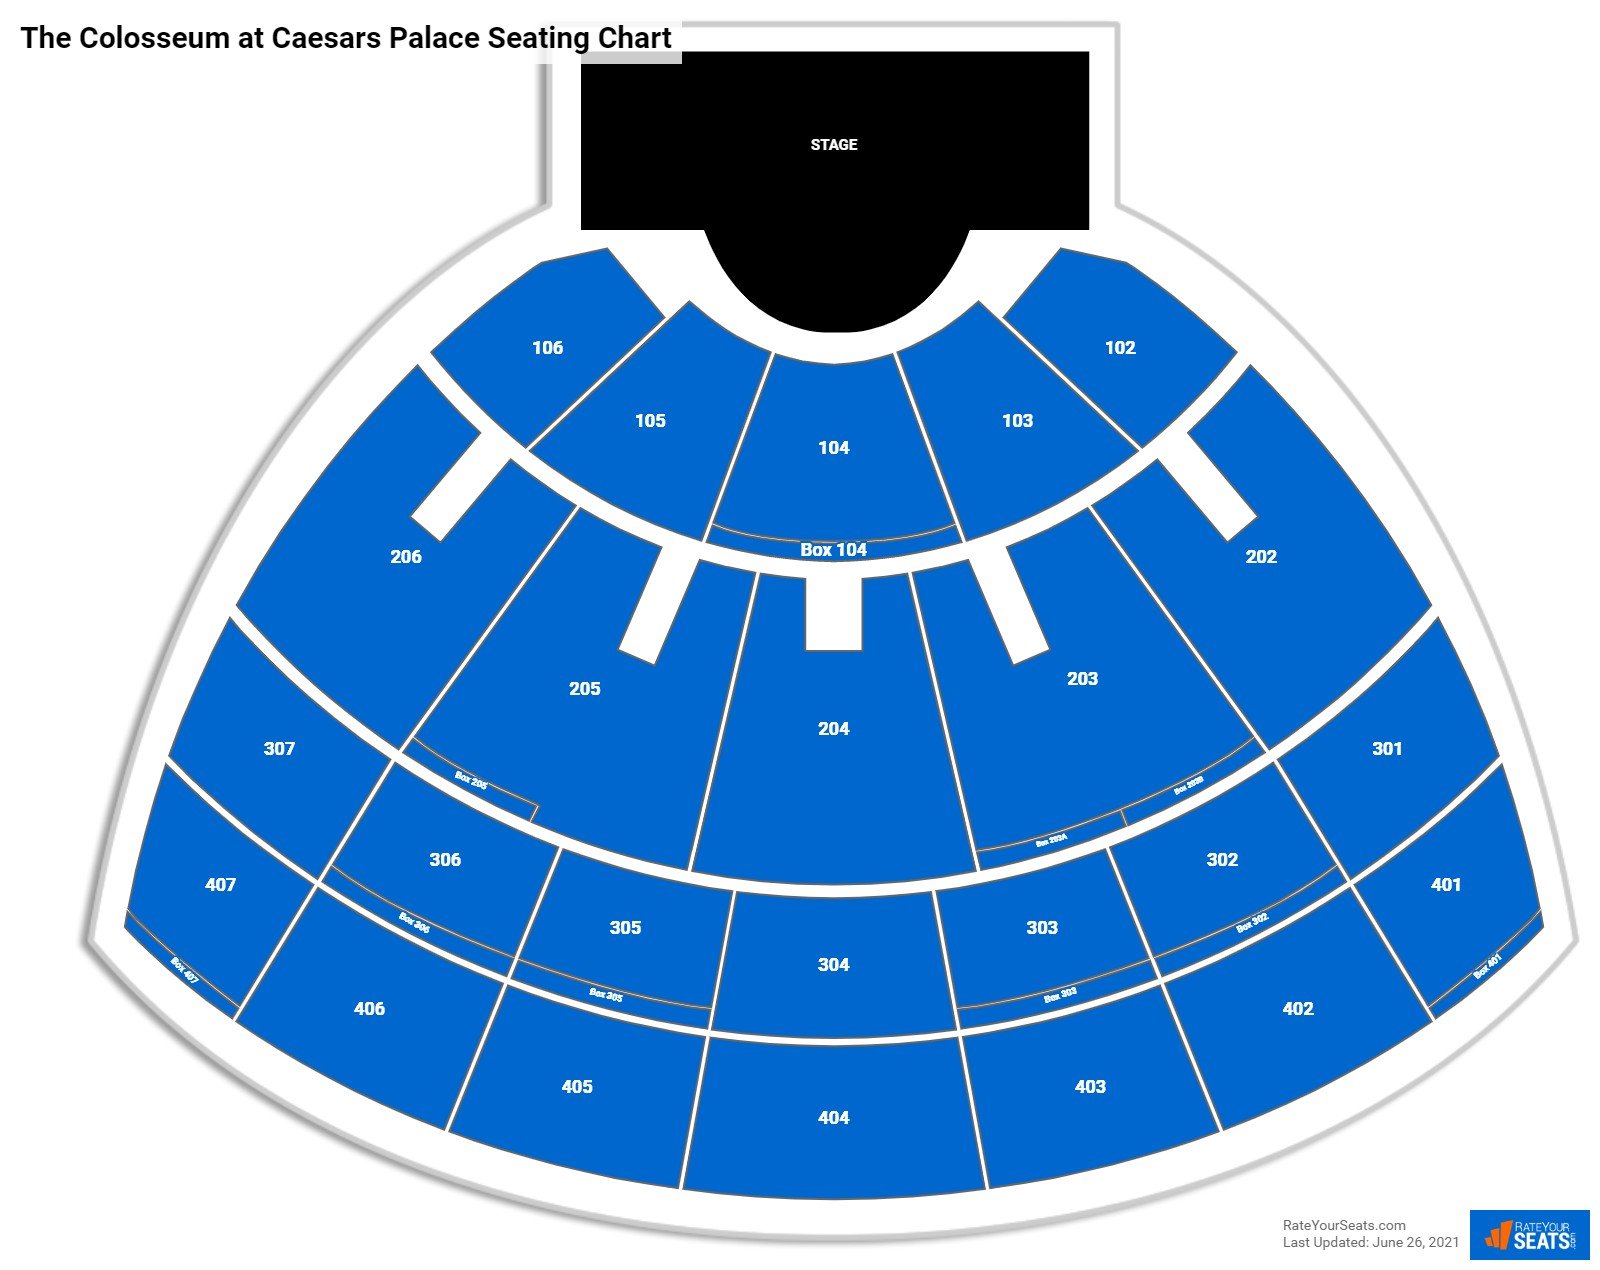 The Colosseum at Caesars Palace Seating Chart - RateYourSeats.com